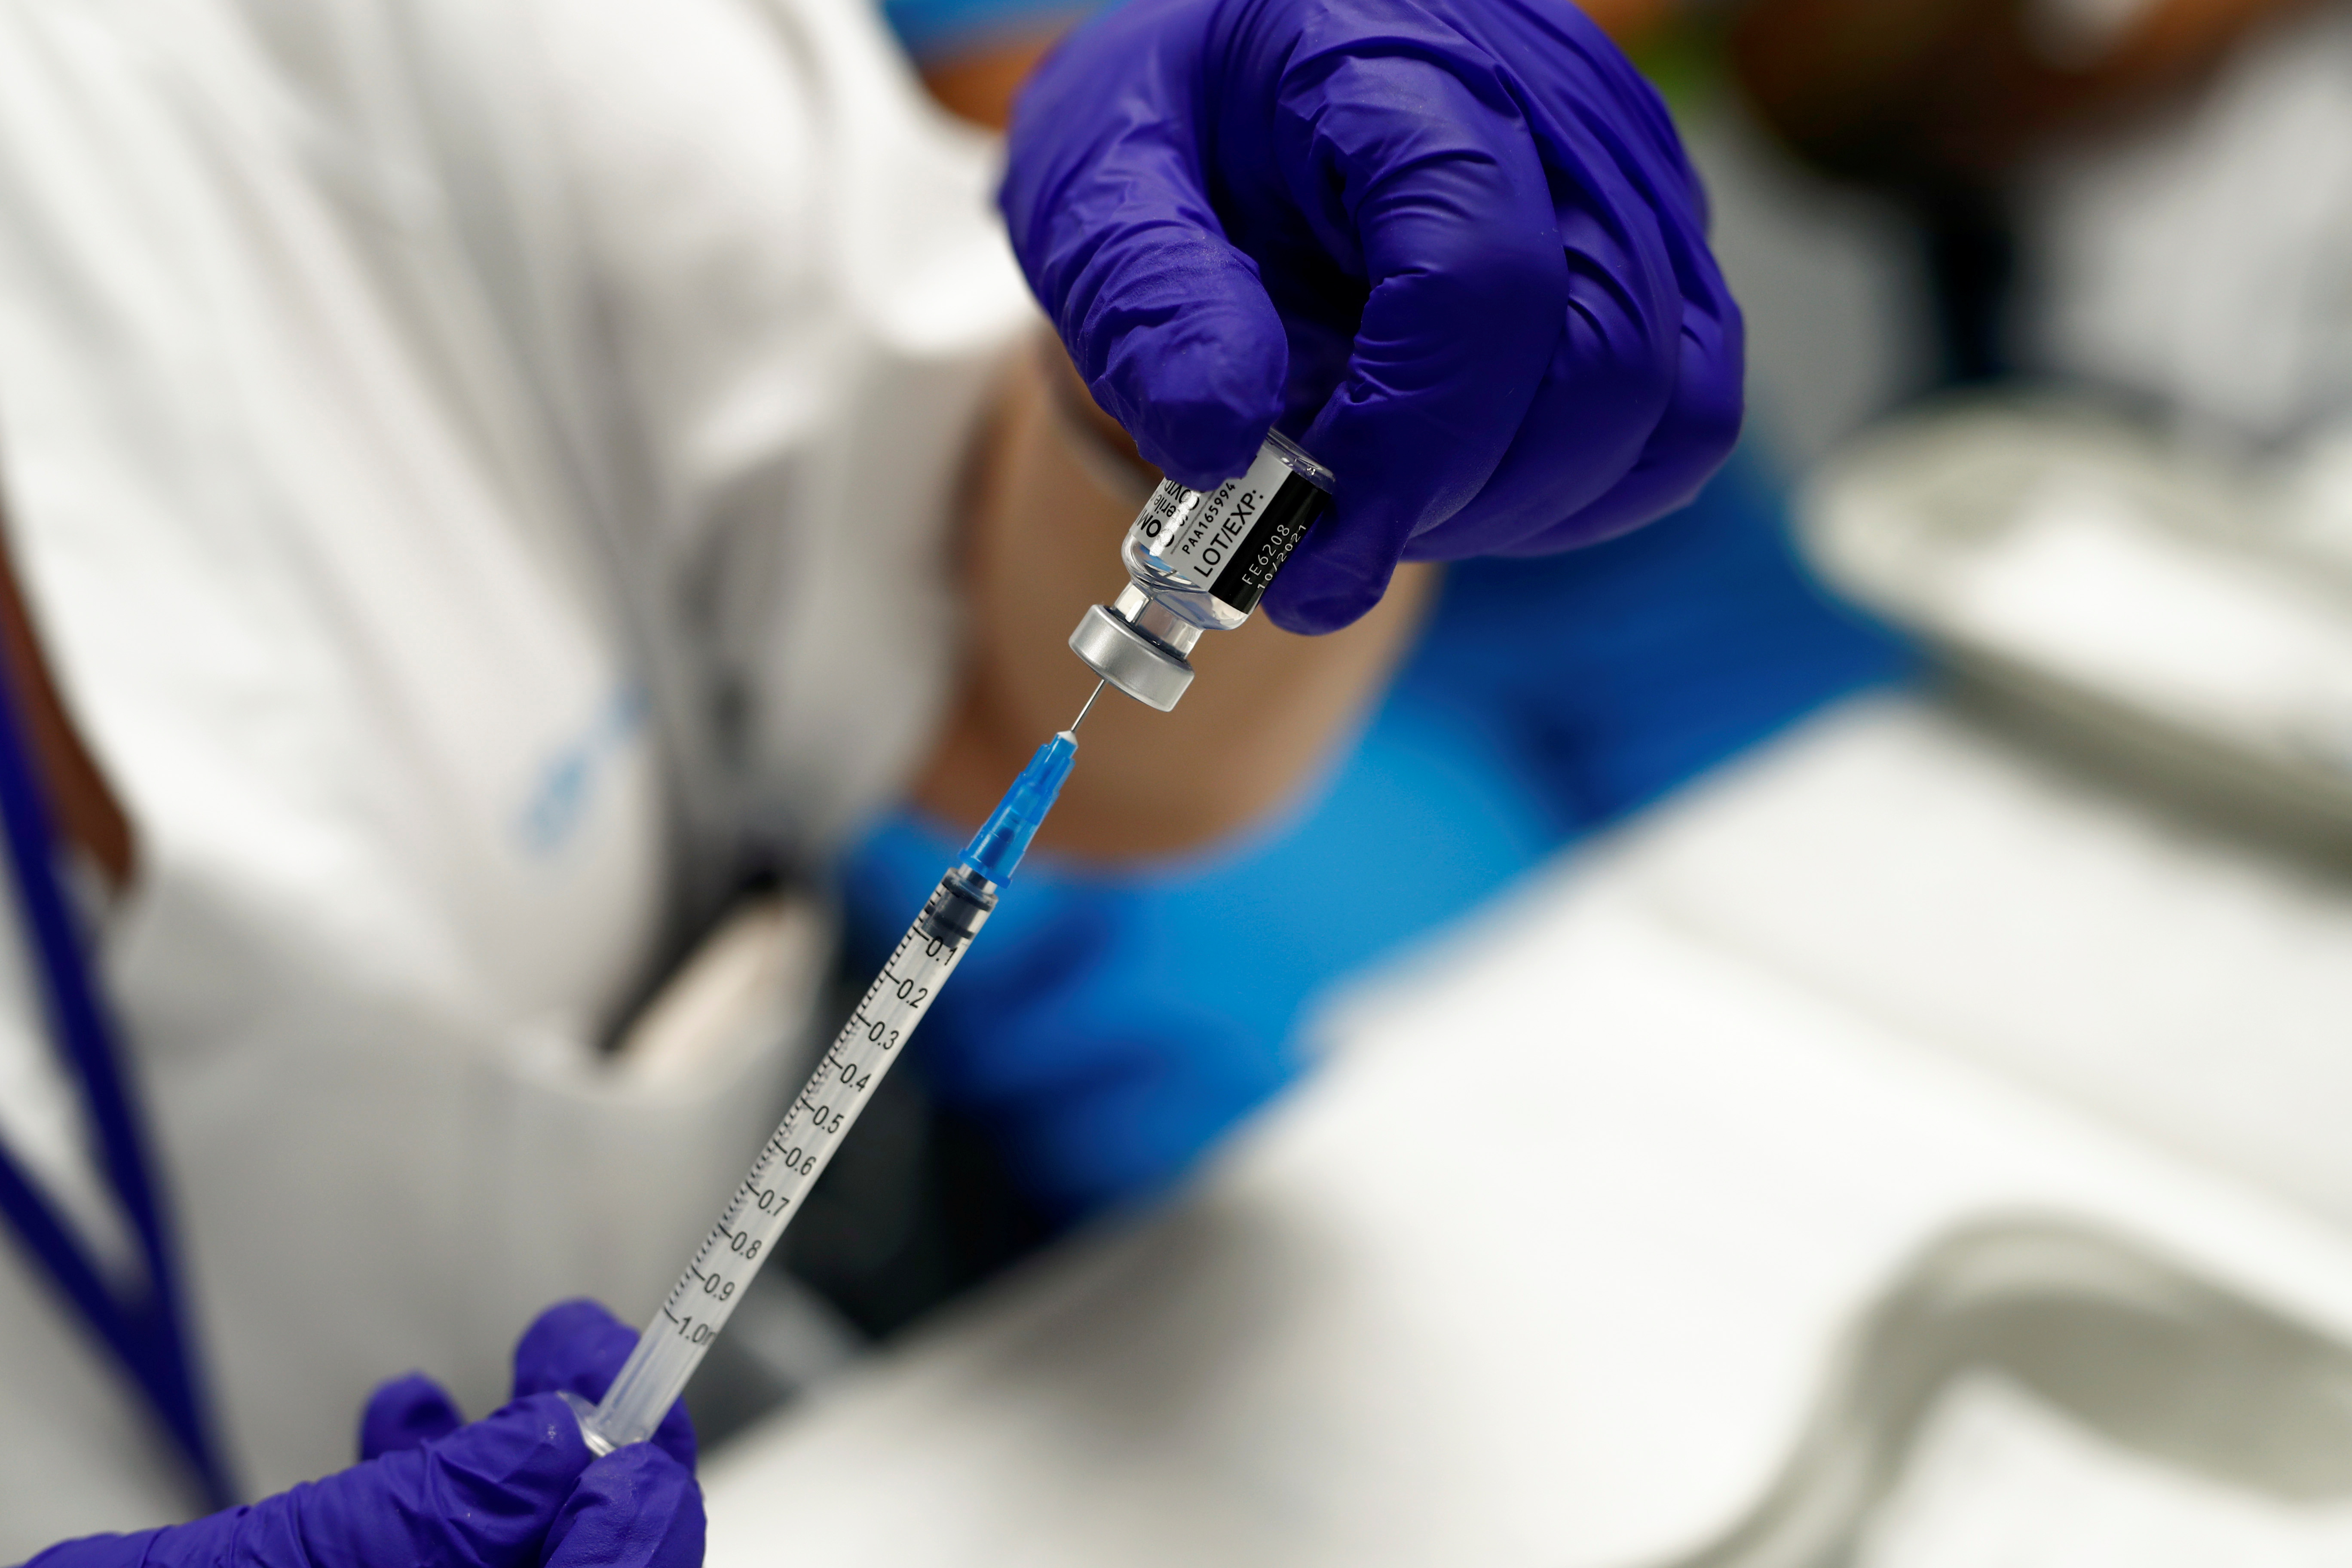 Spain extends vaccination to curb surge among population under 30